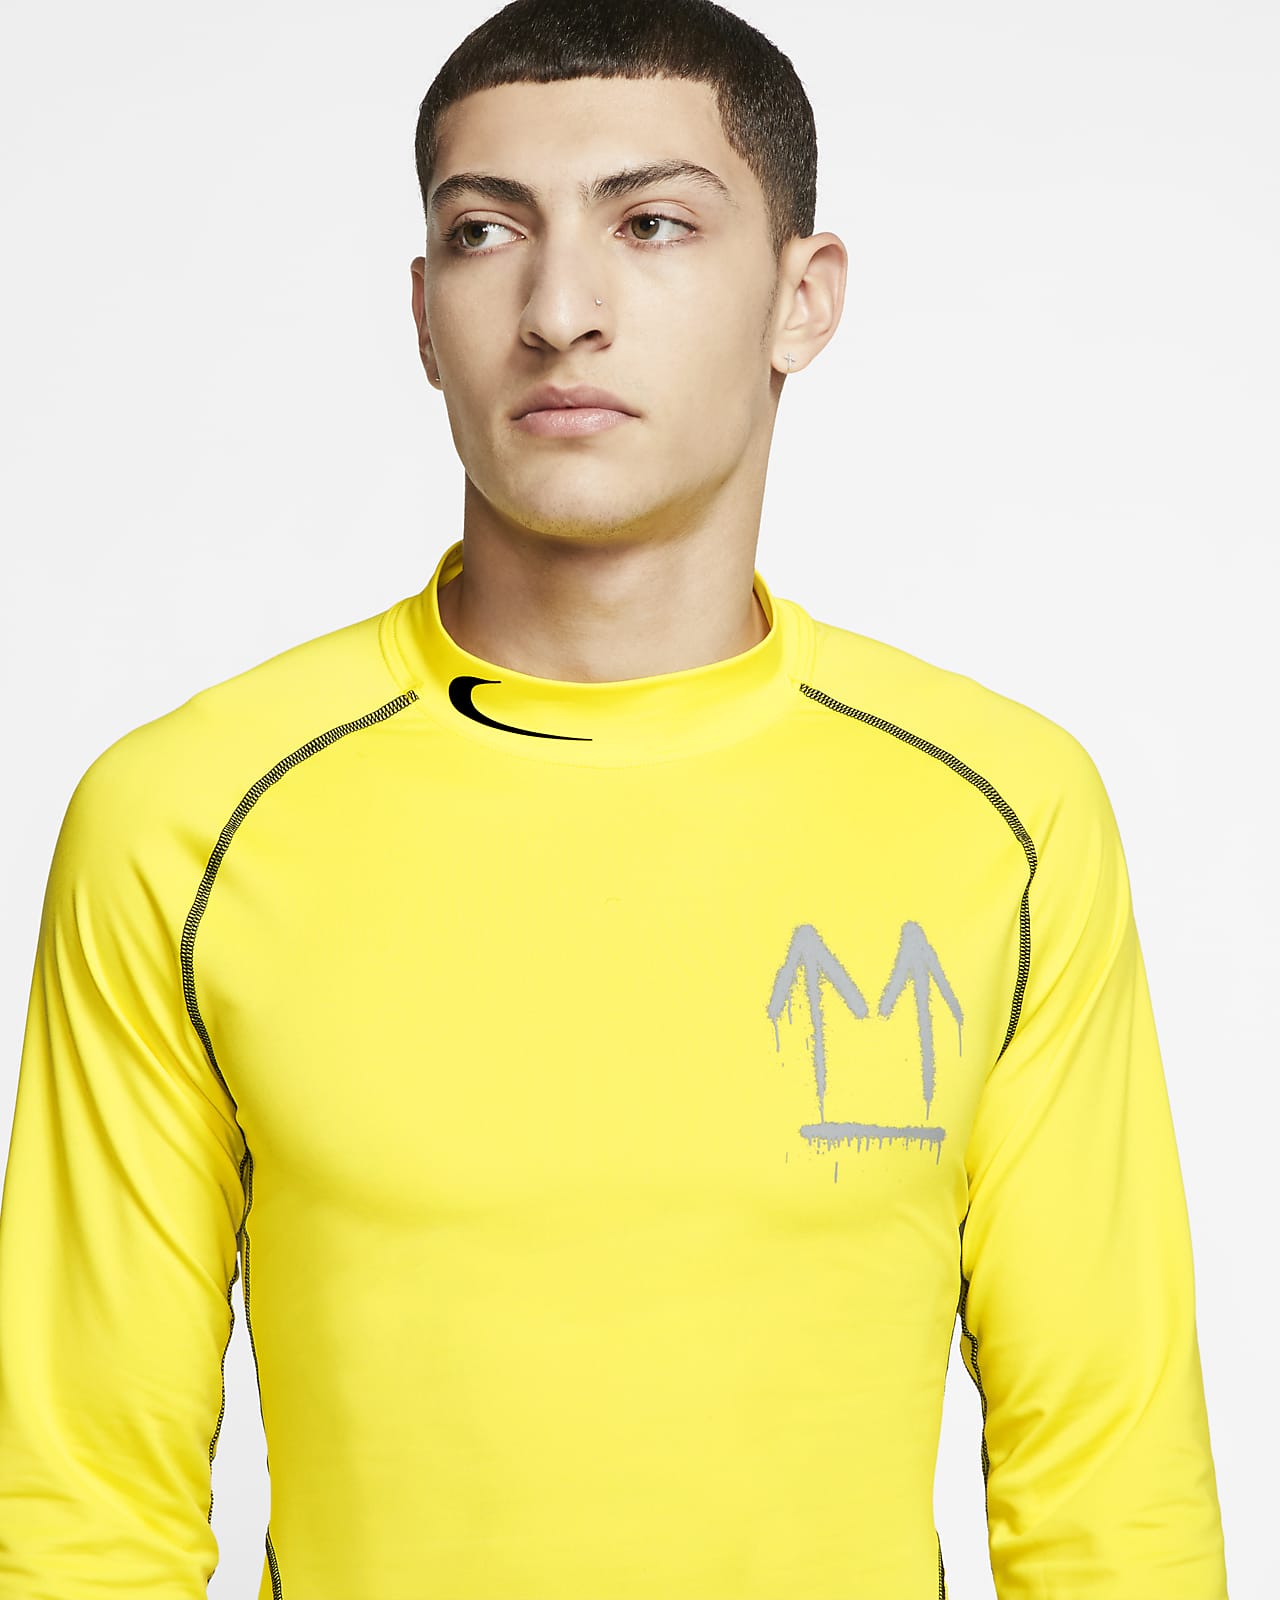 Nike x Off-White™ Pro Long-Sleeve Top 